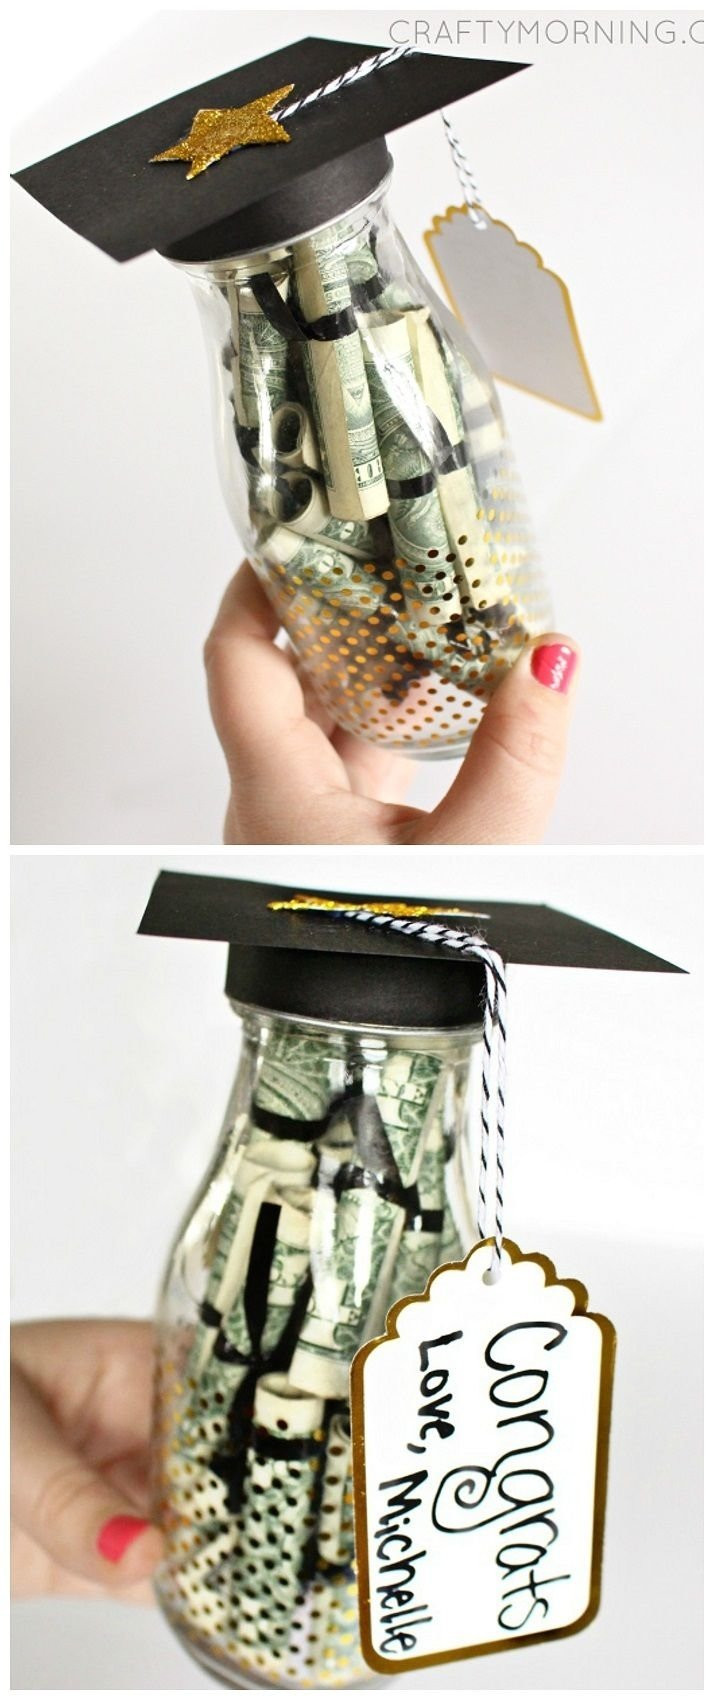 College Graduation Gift Ideas For Son
 10 Most Popular High School Graduation Gift Ideas For Son 2019